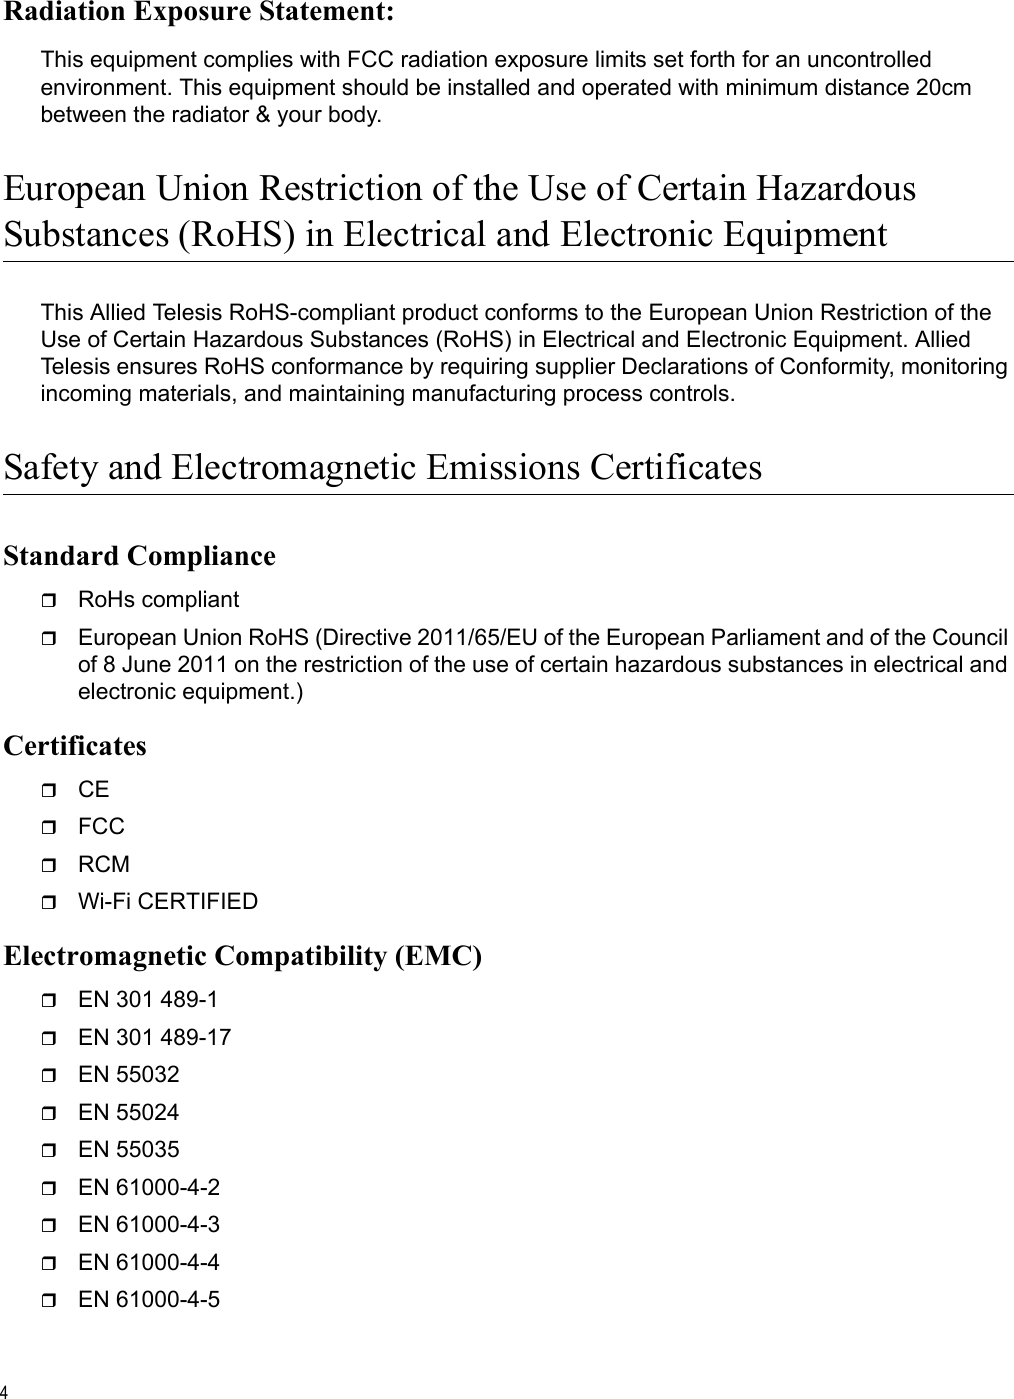 4Radiation Exposure Statement:This equipment complies with FCC radiation exposure limits set forth for an uncontrolled environment. This equipment should be installed and operated with minimum distance 20cm between the radiator &amp; your body.European Union Restriction of the Use of Certain HazardousSubstances (RoHS) in Electrical and Electronic EquipmentThis Allied Telesis RoHS-compliant product conforms to the European Union Restriction of the Use of Certain Hazardous Substances (RoHS) in Electrical and Electronic Equipment. Allied Telesis ensures RoHS conformance by requiring supplier Declarations of Conformity, monitoring incoming materials, and maintaining manufacturing process controls.Safety and Electromagnetic Emissions CertificatesStandard ComplianceRoHs compliantEuropean Union RoHS (Directive 2011/65/EU of the European Parliament and of the Council of 8 June 2011 on the restriction of the use of certain hazardous substances in electrical and electronic equipment.)CertificatesCEFCCRCMWi-Fi CERTIFIEDElectromagnetic Compatibility (EMC)EN 301 489-1EN 301 489-17EN 55032EN 55024EN 55035EN 61000-4-2EN 61000-4-3EN 61000-4-4EN 61000-4-5Draft 5 on February 14, 2019